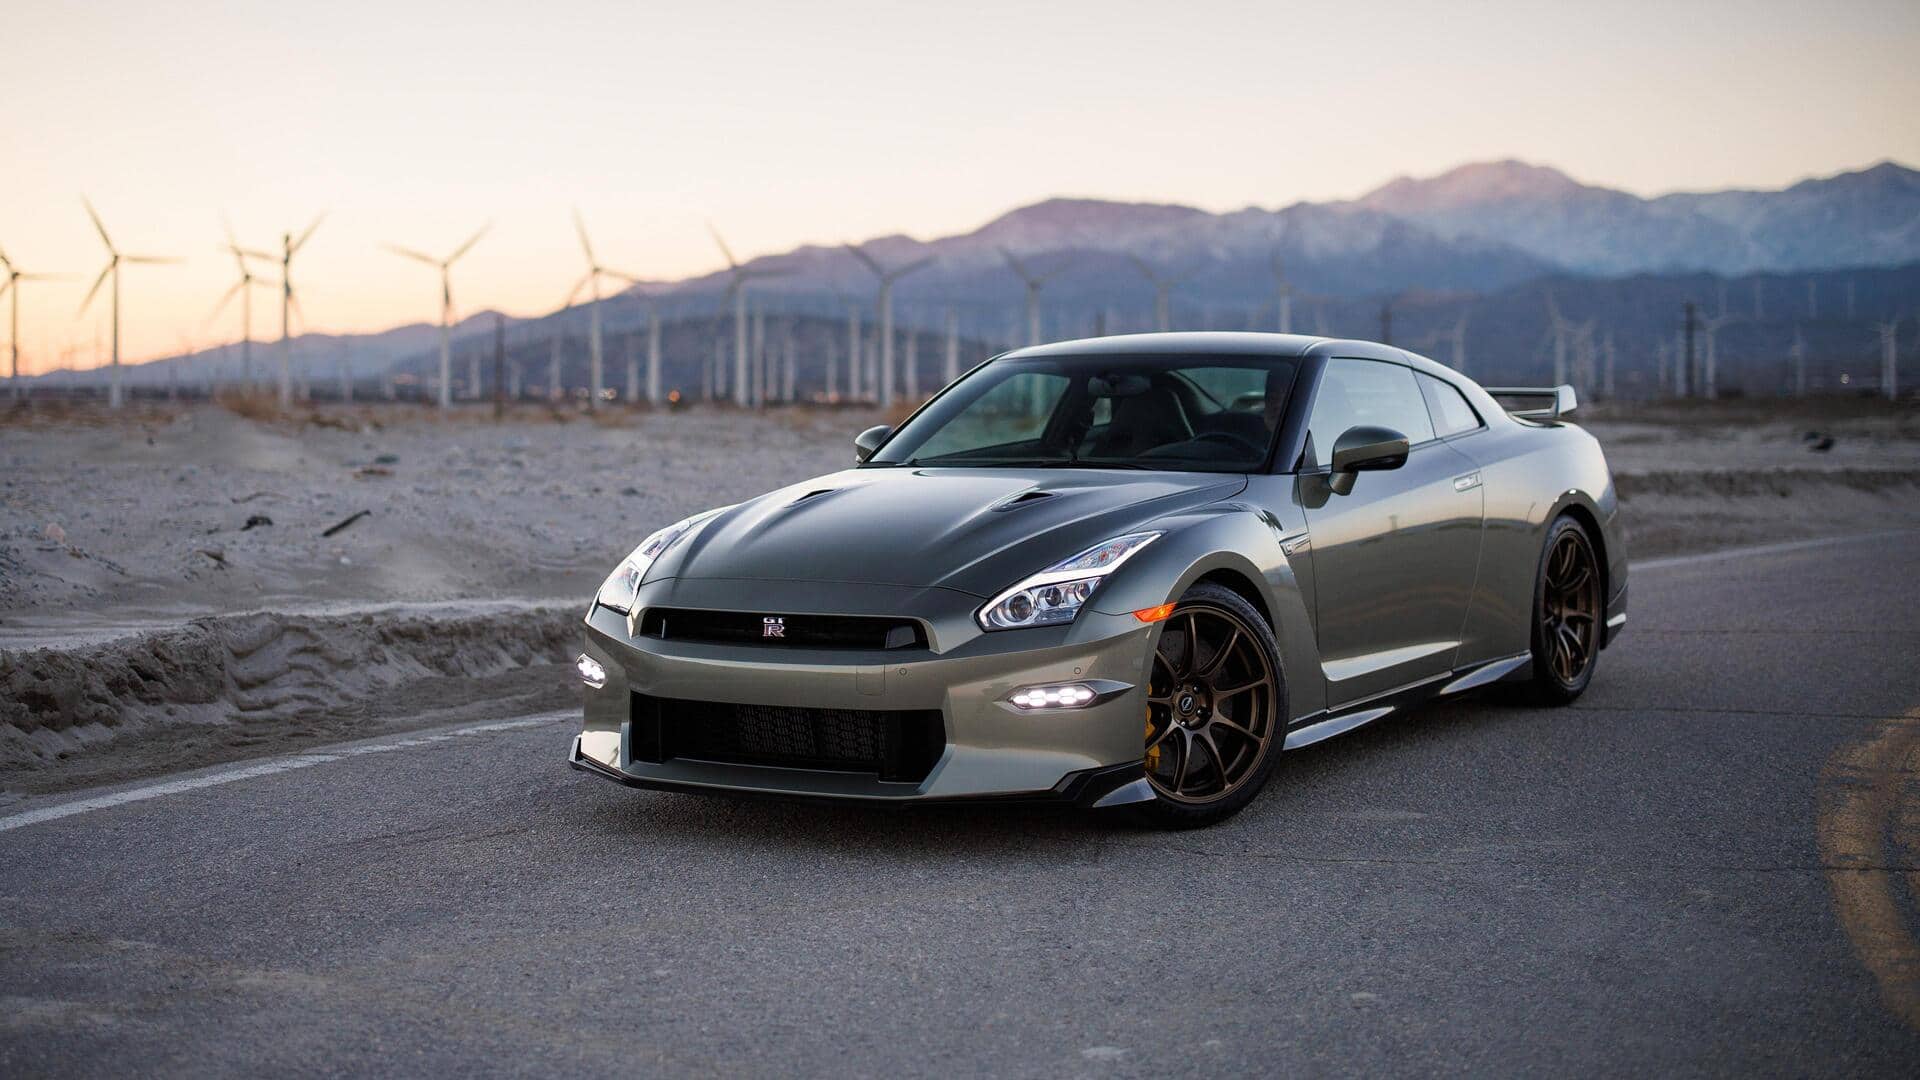 Nissan to bid adieu to GT-R with special limited-run model